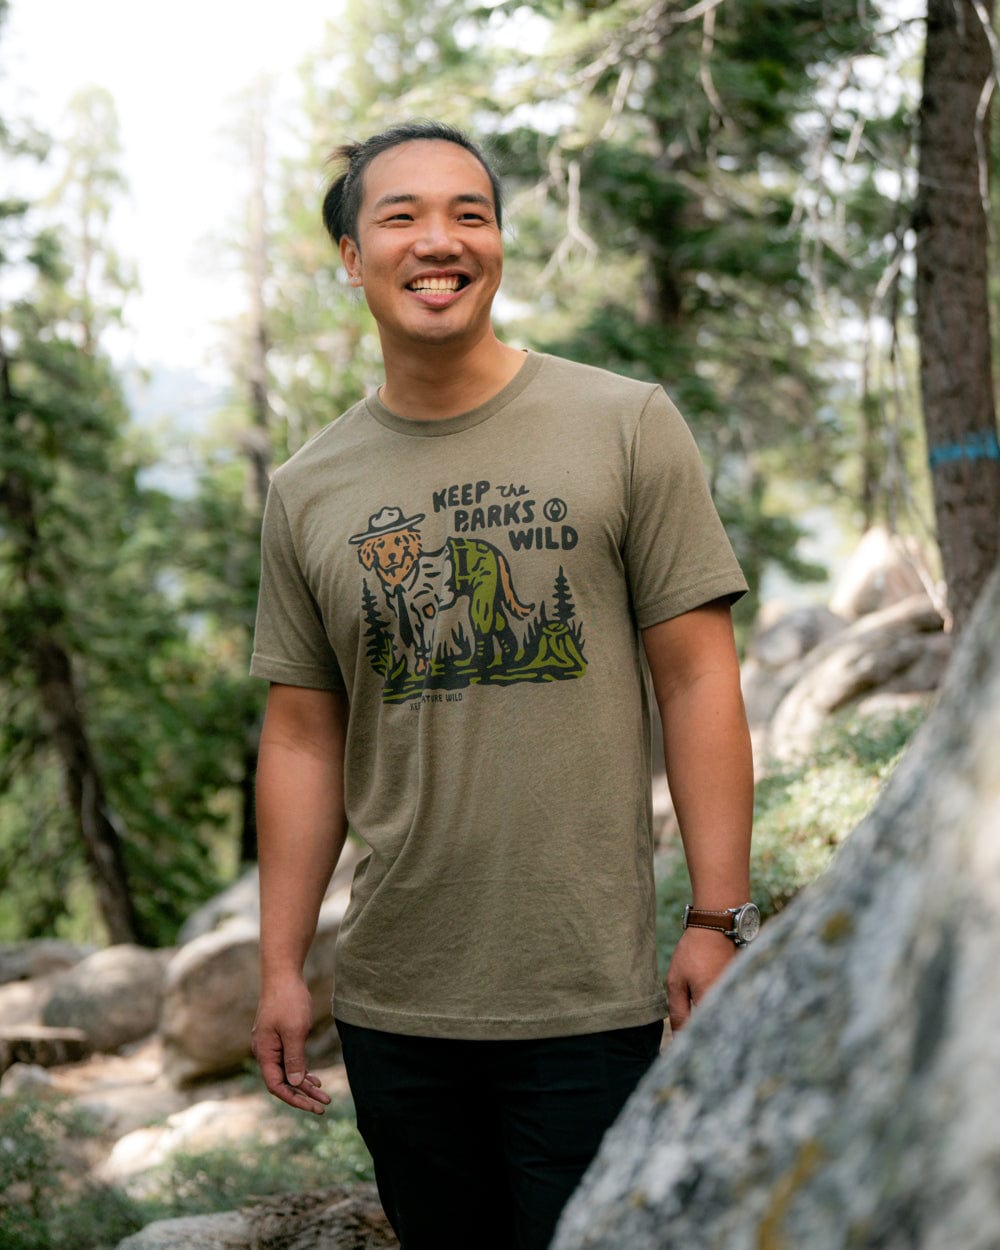 Adventure Mountain Themed T Shirt, Hiking Tees, Outdoor Shirts, Wilderness  Graphic Tee, Cool Outdoors Print, Forest Print, Men , Women -  Canada